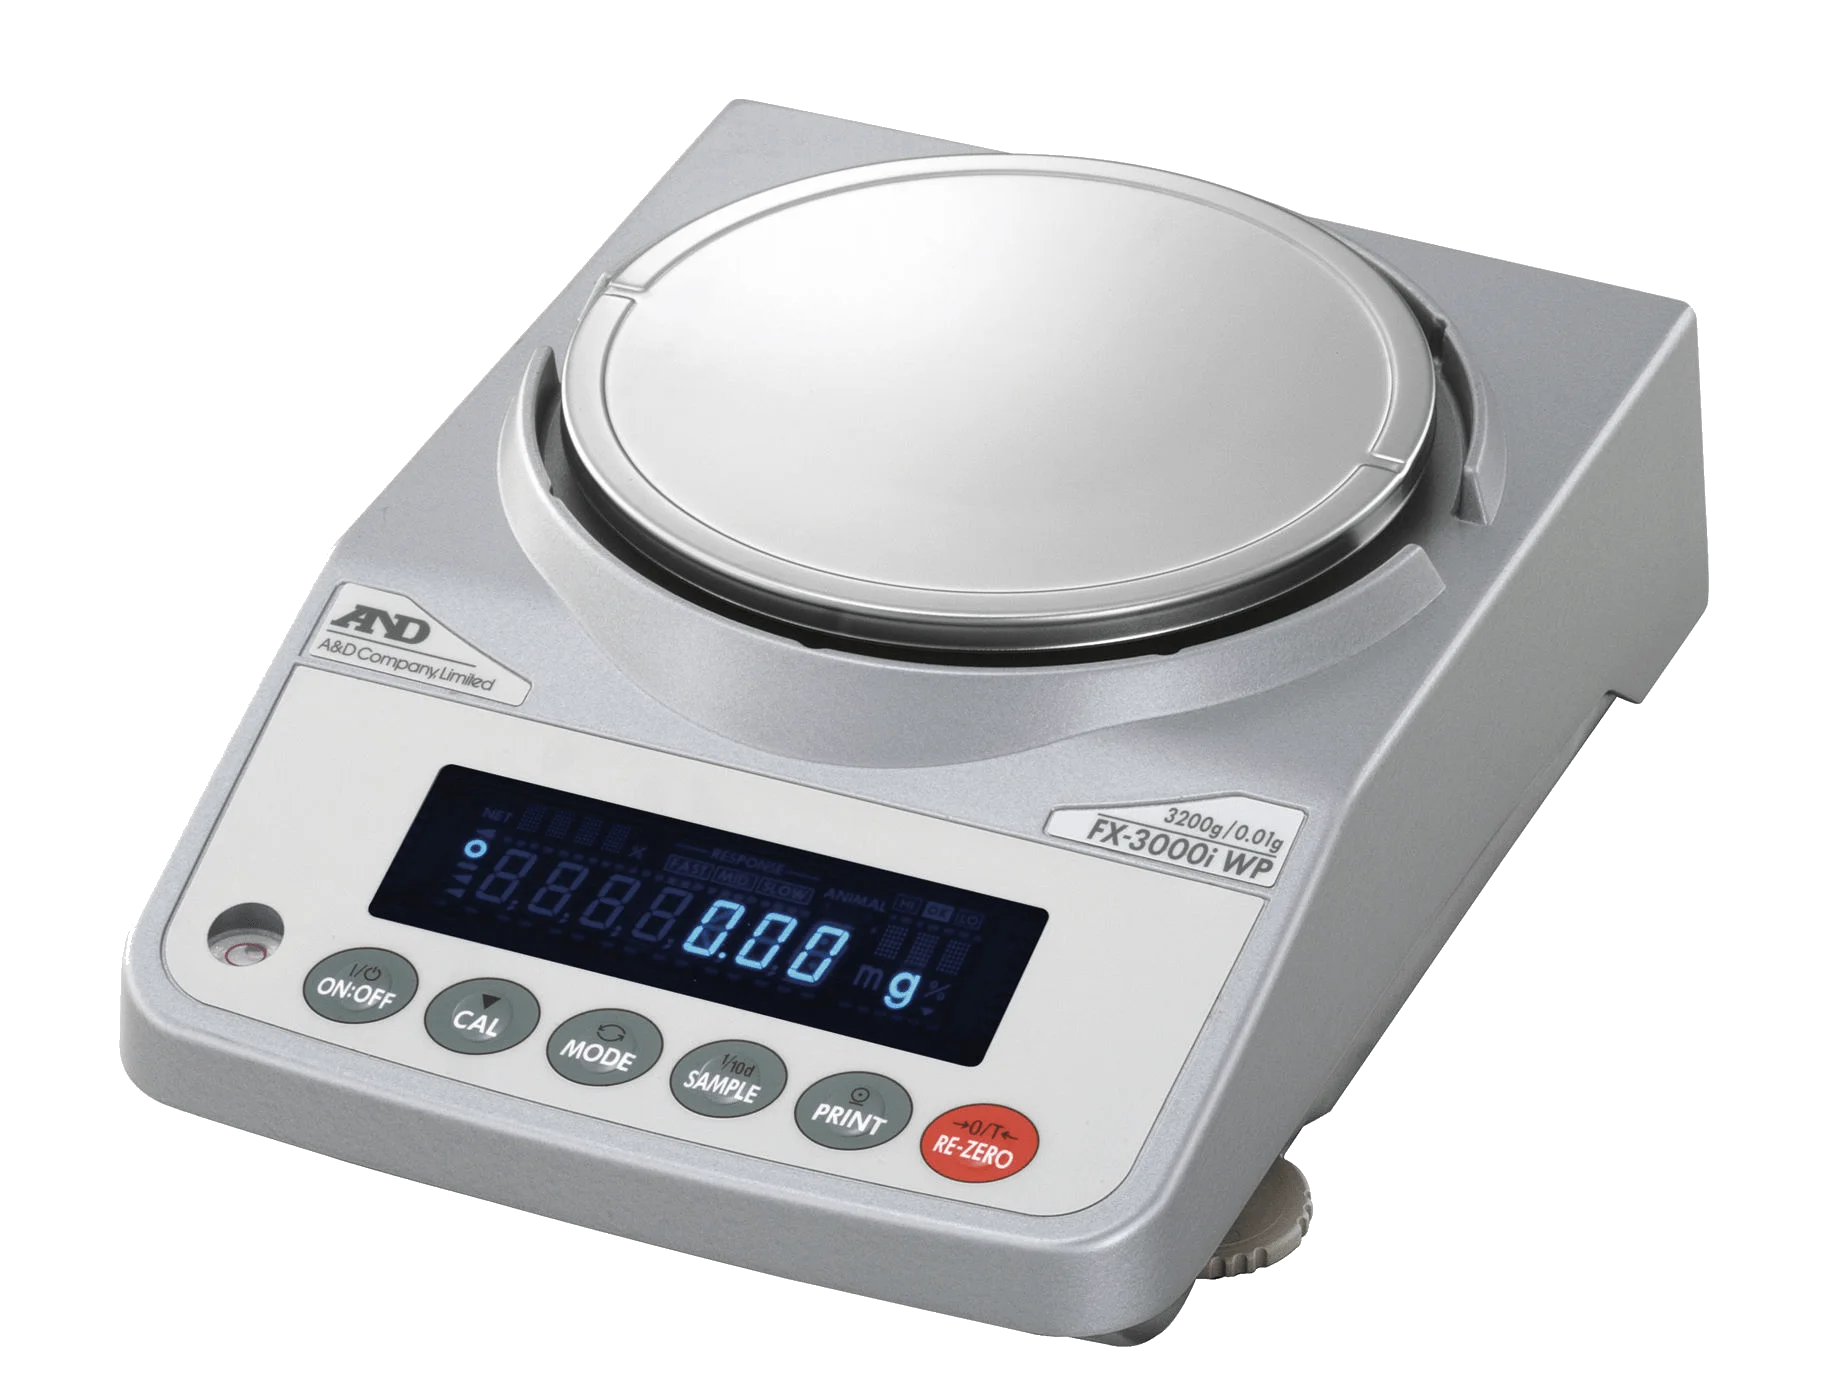 A And D FX-3000i-wp precision balance with digital display. Six raised buttons, from left to right, ON and OFF, Calibrate, Mode, Sample, Print, RE-Zero.